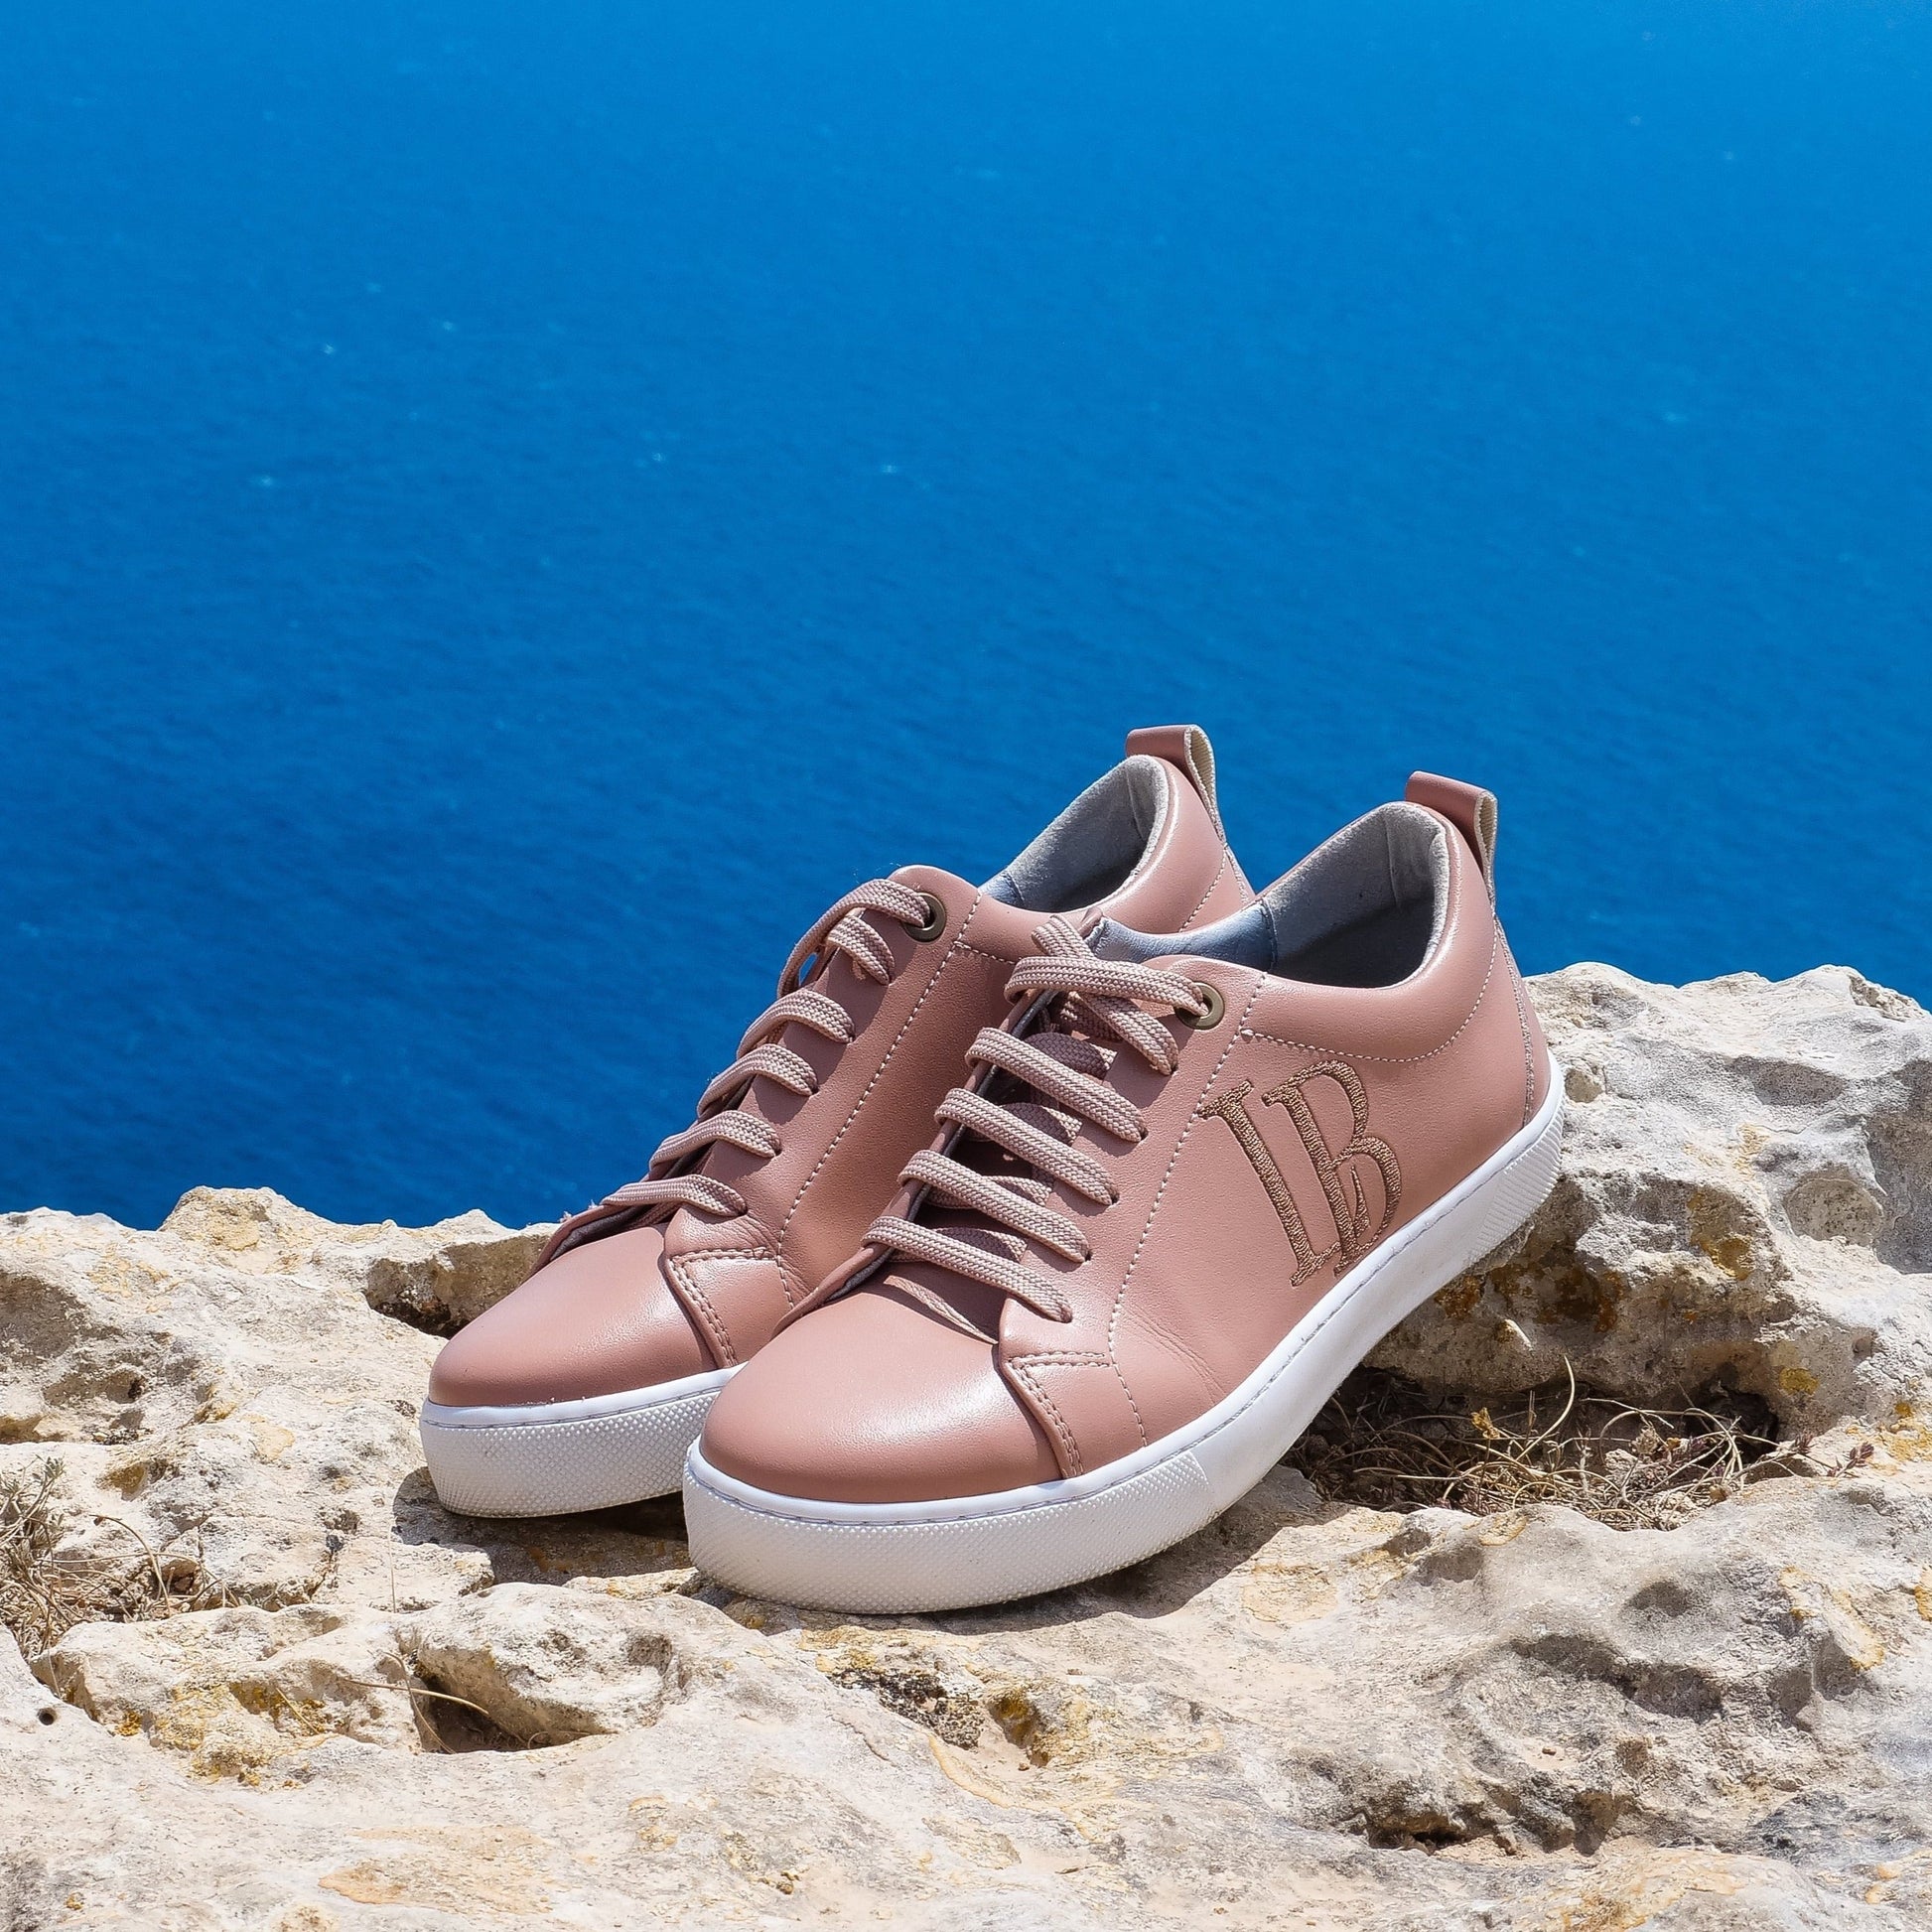 LB Nude Apple Leather Sneakers for Women - Scarvesnthangs